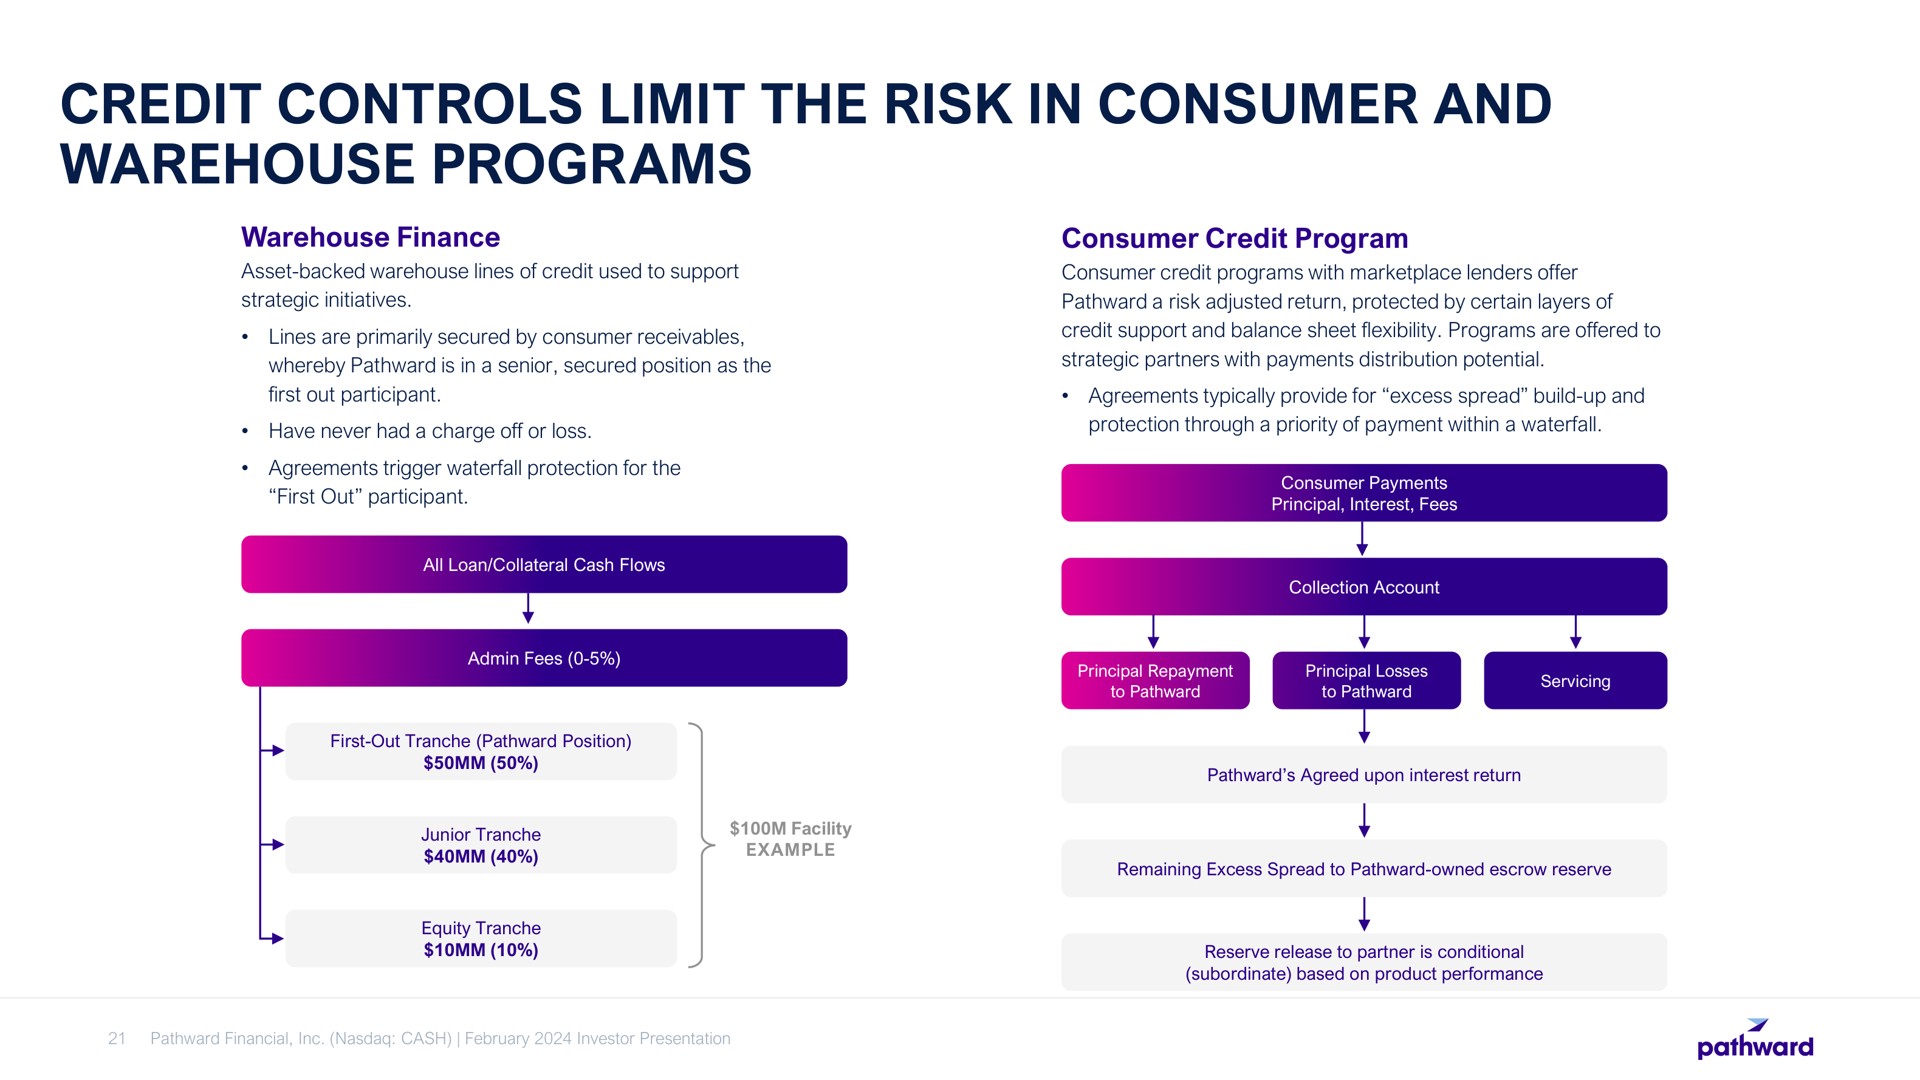 credit controls limit the risk in consumer and warehouse programs | Pathward Financial